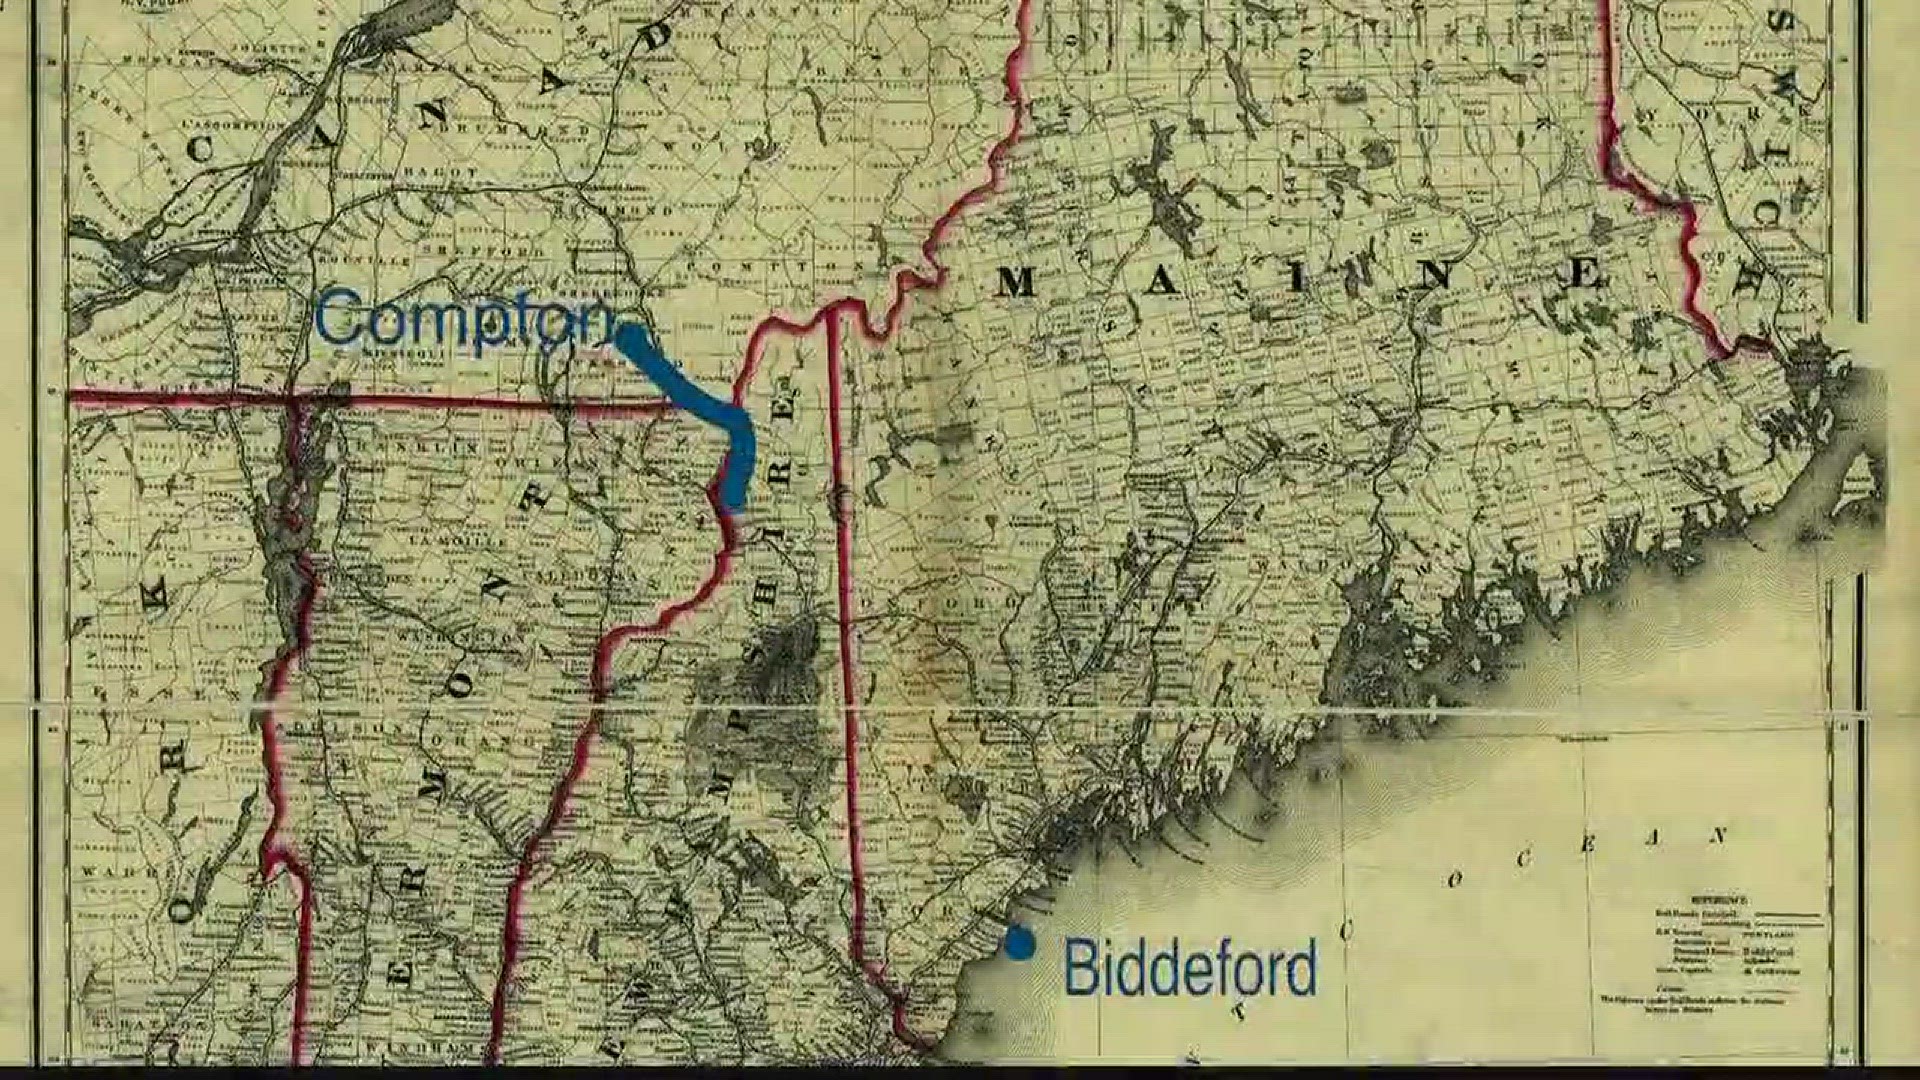 So a guy walks from Quebec to Biddeford...